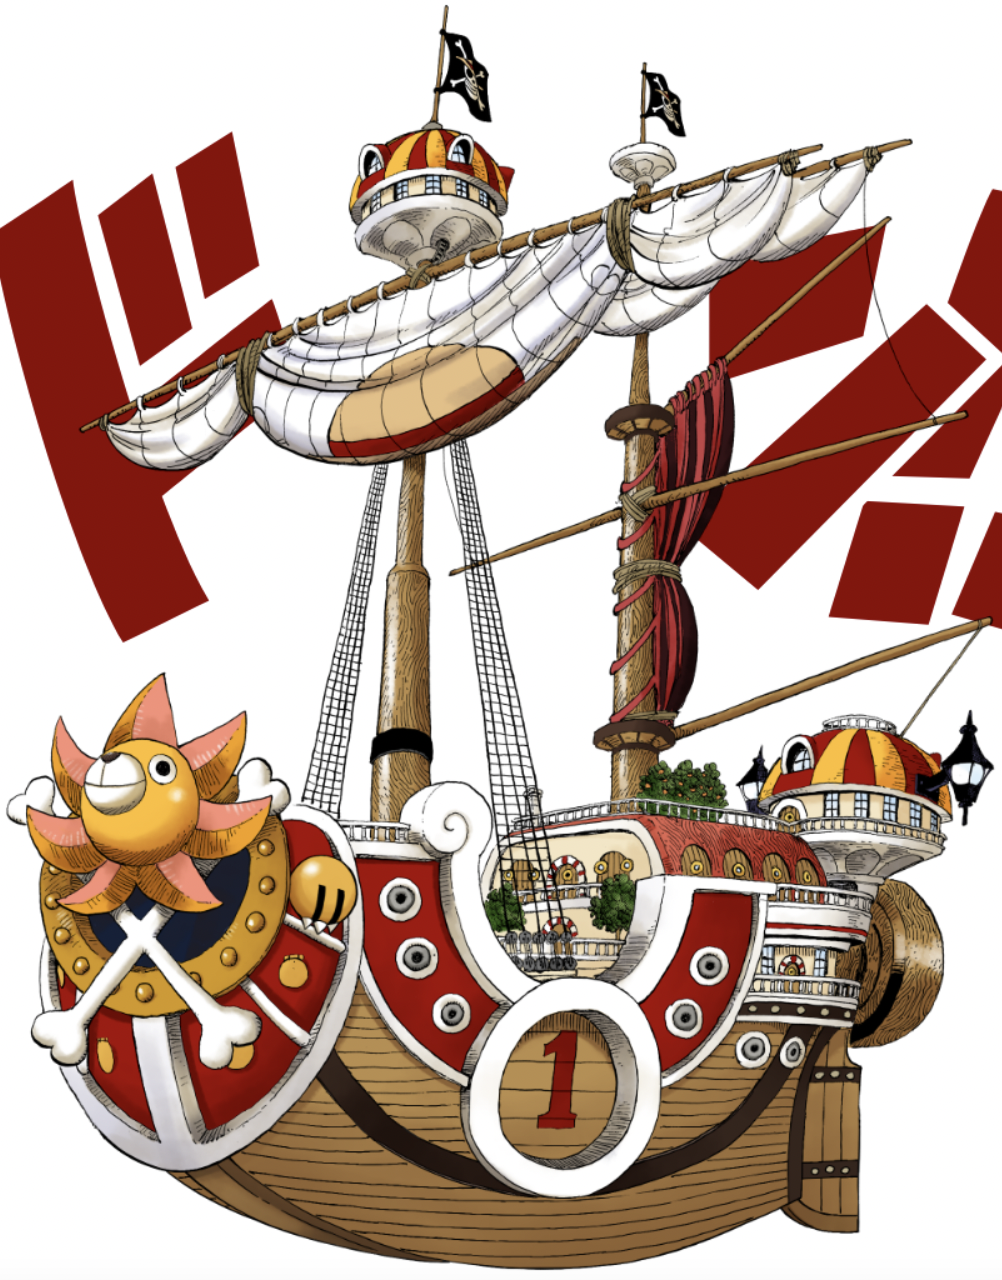 Dr. Vegapunk] One Piece Chapter 1061 Spoilers, Raw Scans, Release Date -  Anime Troop